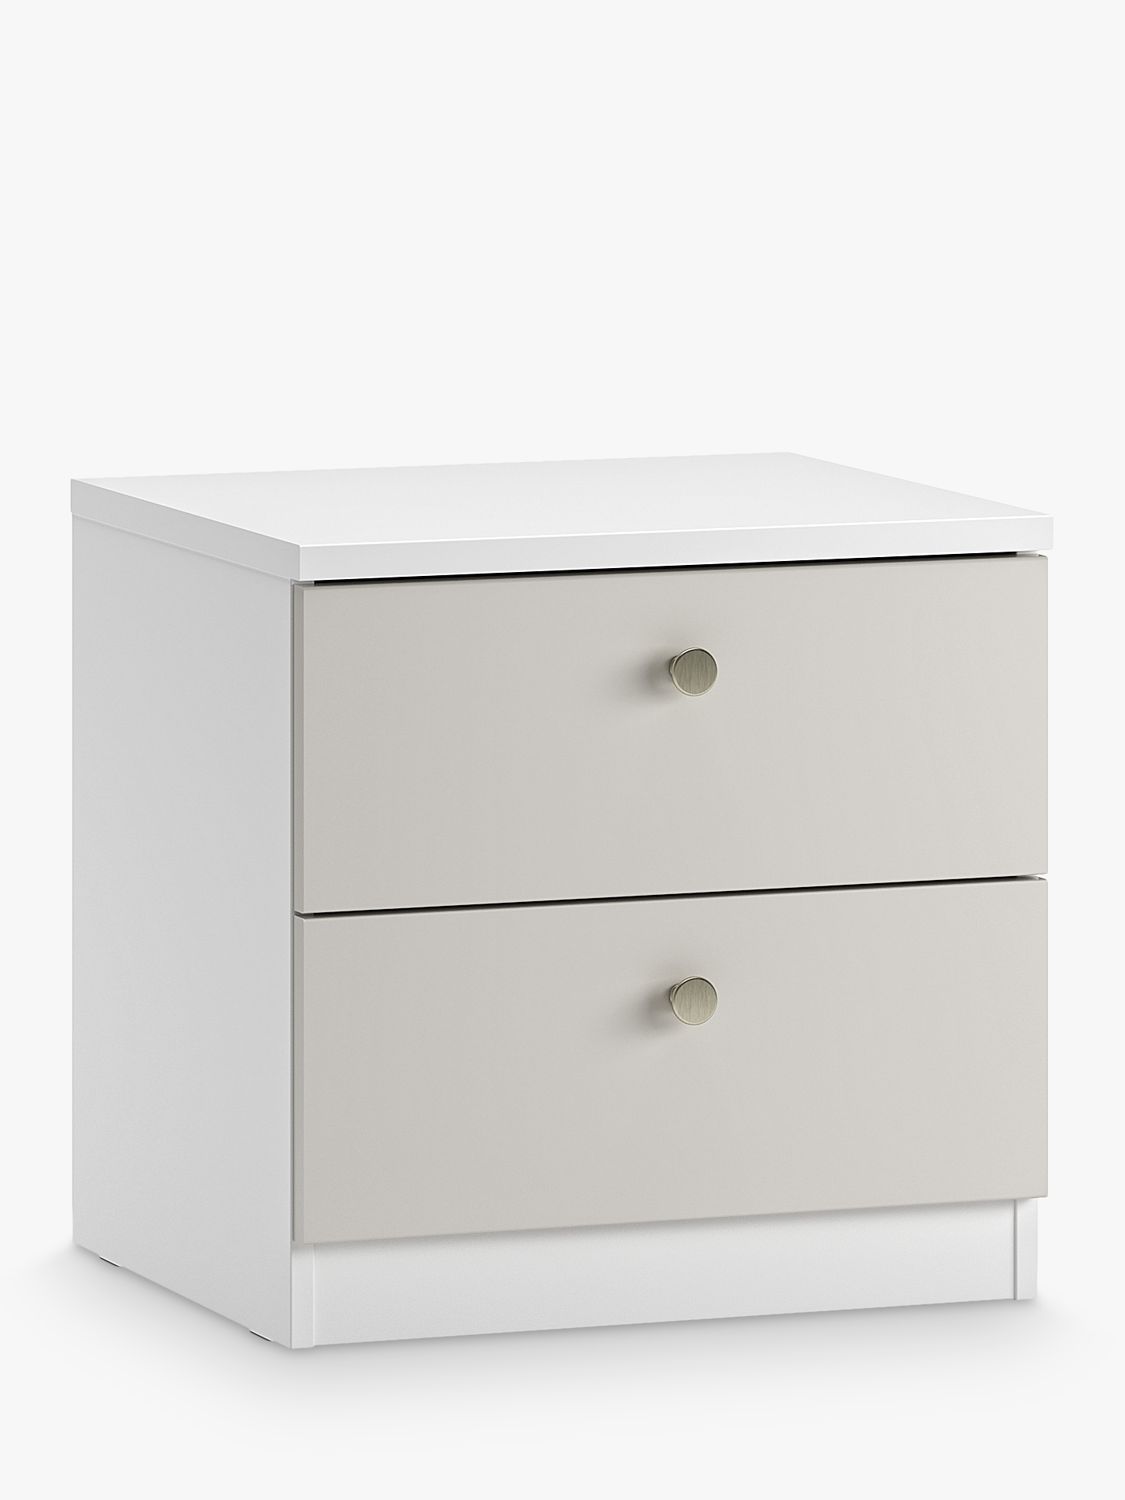 Photo of John lewis anyday mix it bedside table white/smoke